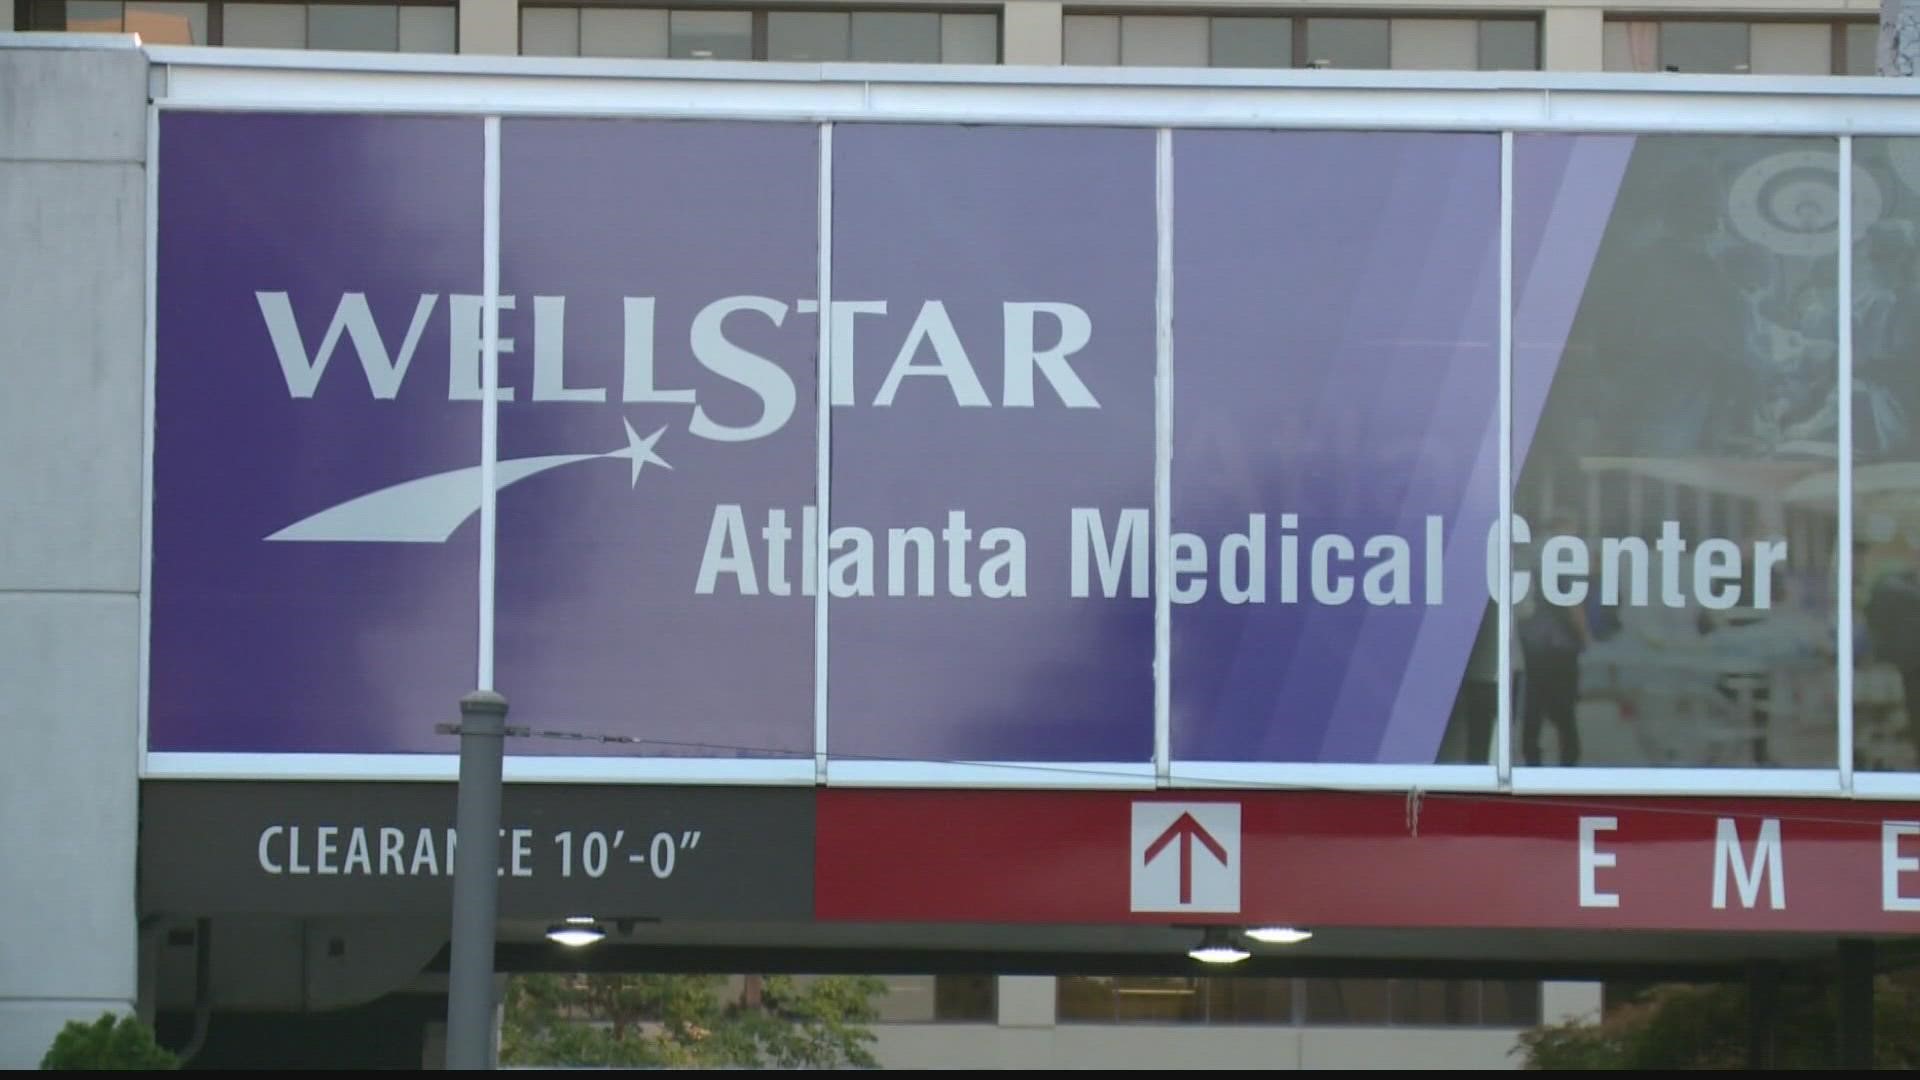 A nurse said Grady and Atlanta Medical Center often send patients to each other. When dealing with trauma patients, every single second counts.